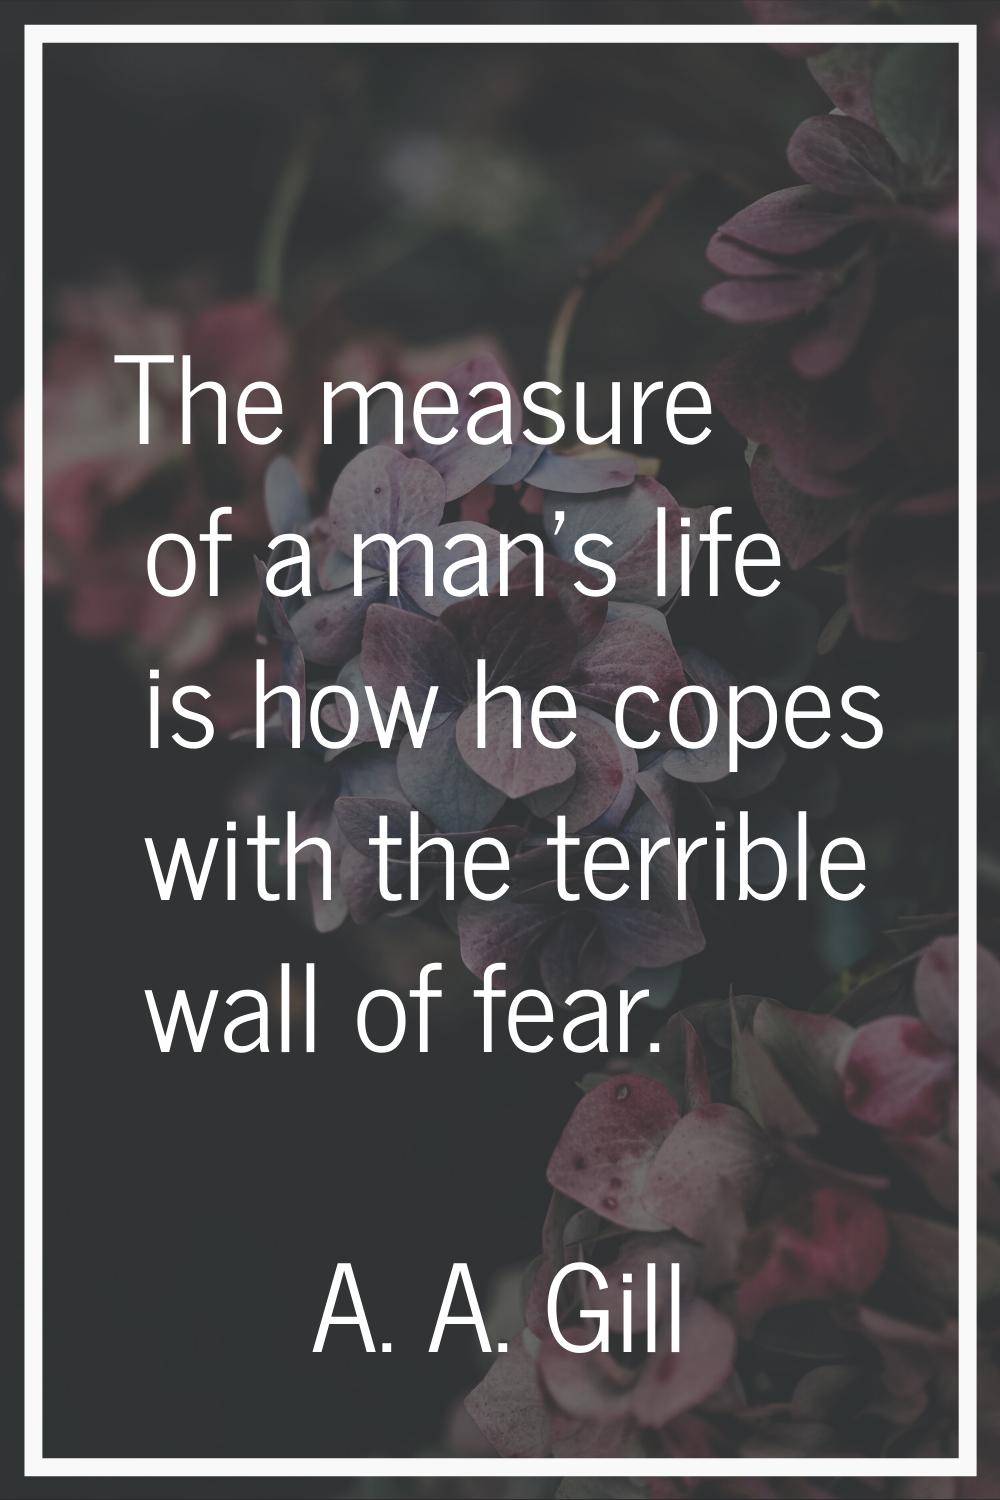 The measure of a man's life is how he copes with the terrible wall of fear.